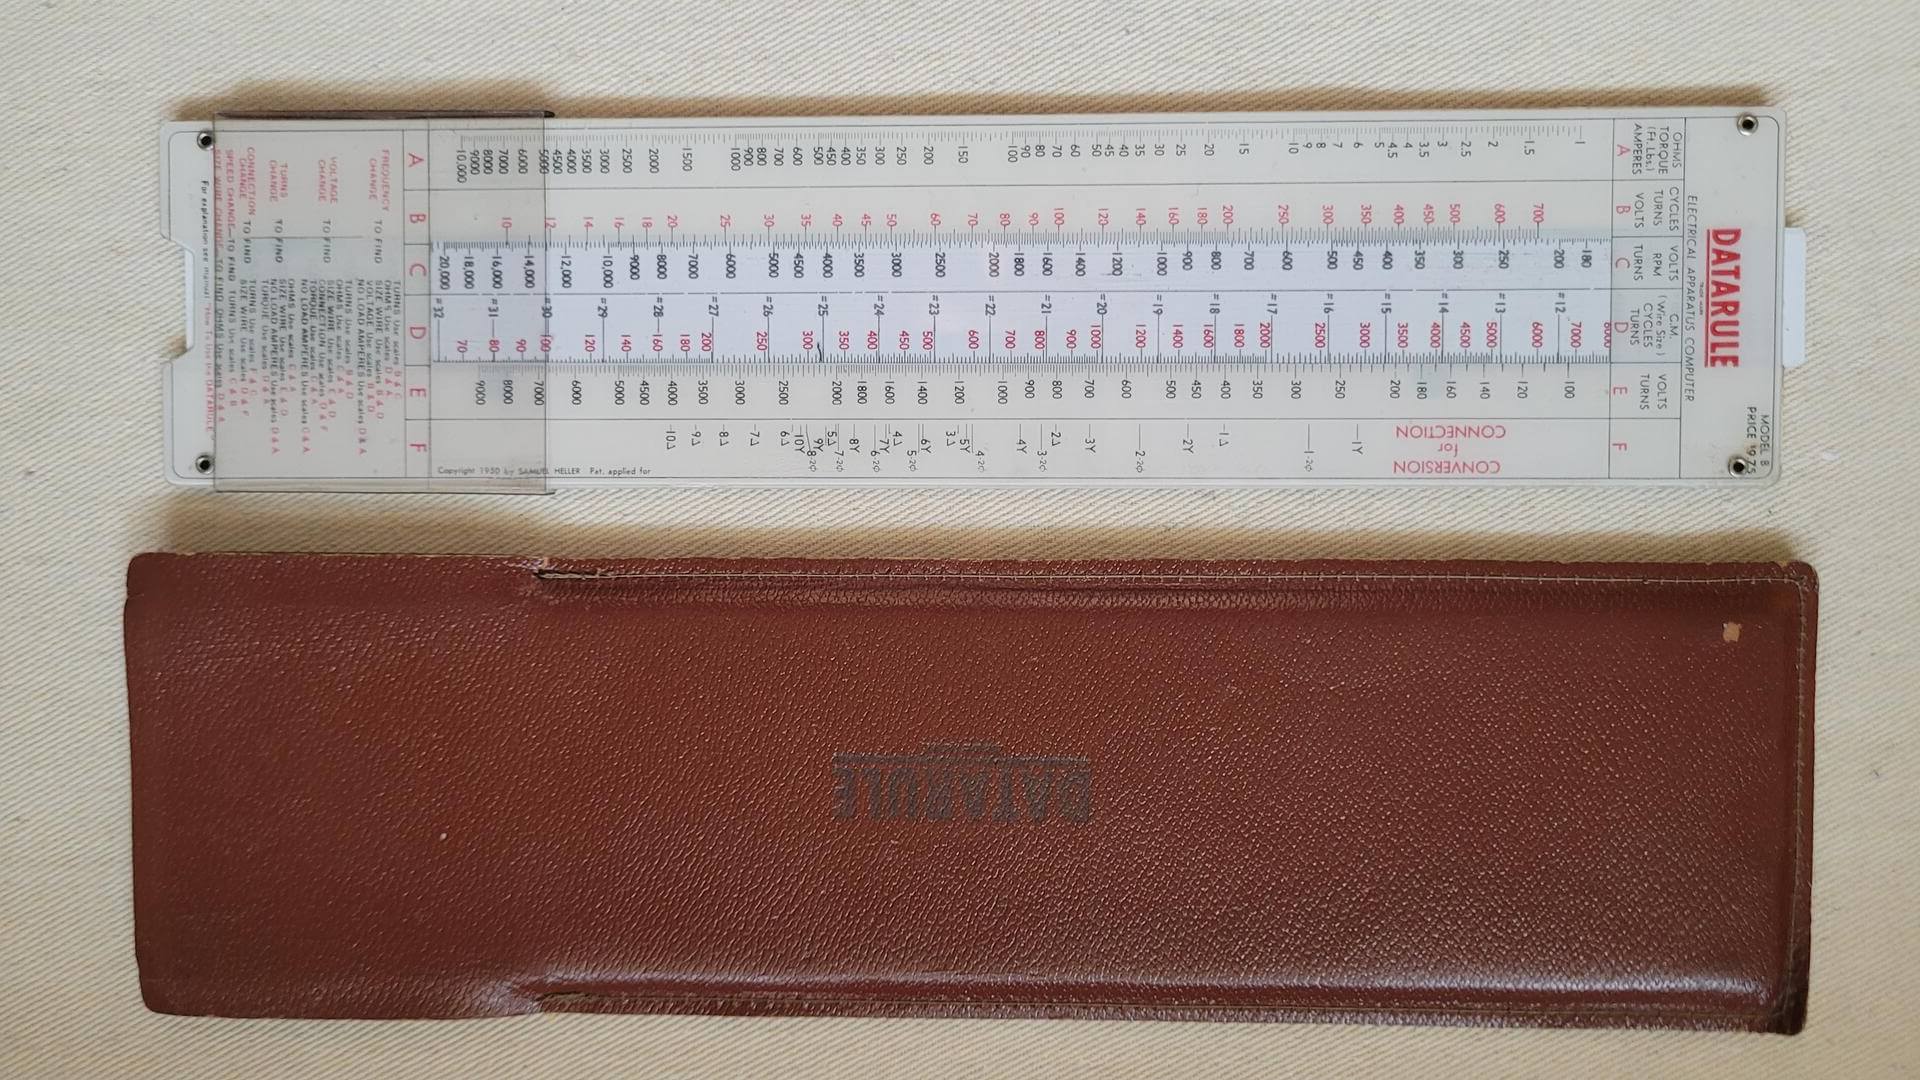 Rare Datarule Electrical Apparatus Computer Slide Rule w Leather Case Model B - 1950 Samuel Heller / Datarule Publishing Co Scarsdale NY - Vintage collectible Electrical Engineer Tools